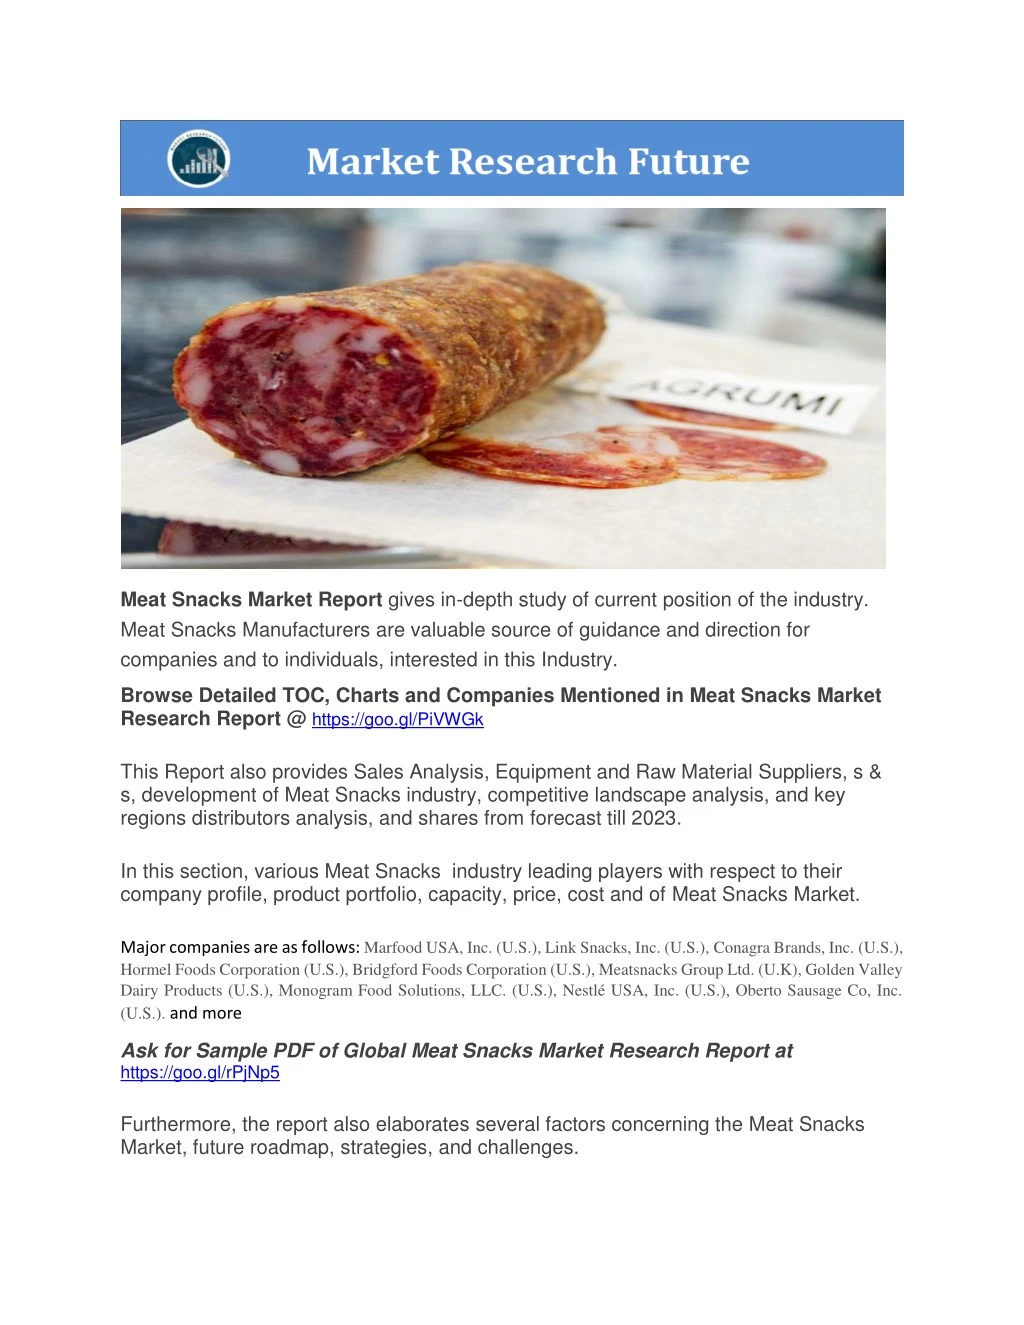 meat snacks market report gives in depth study